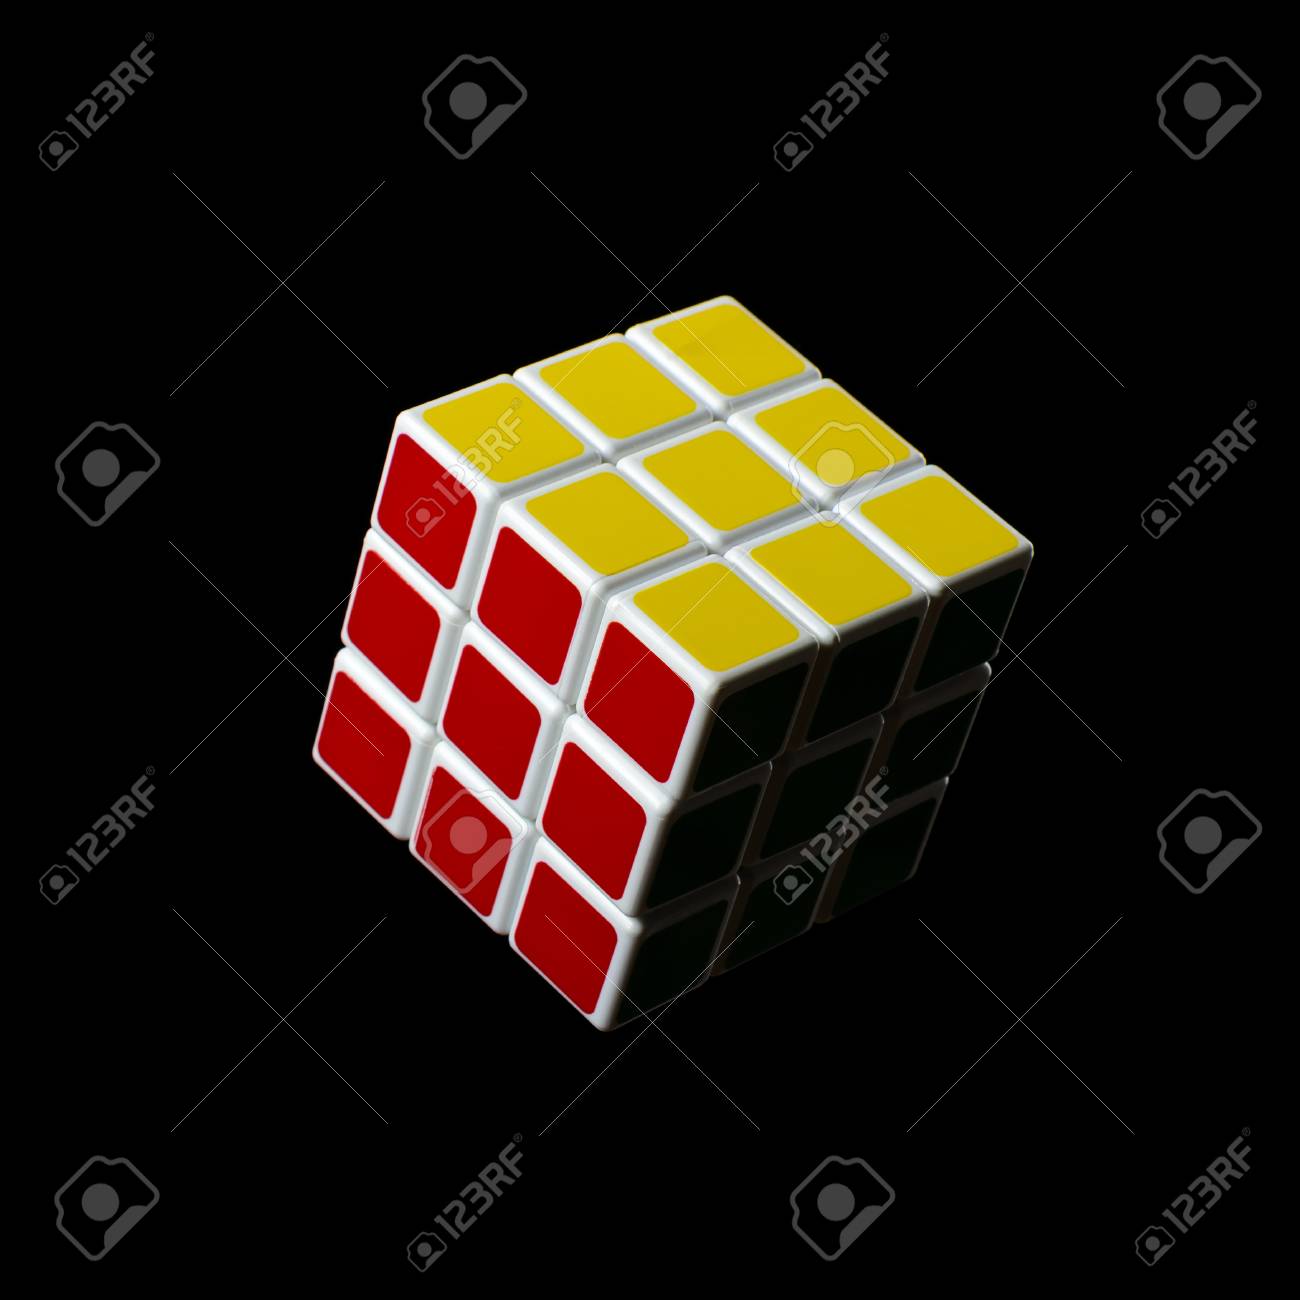 Toy Rubik S Cube On A Black Background Stock Photo Picture And